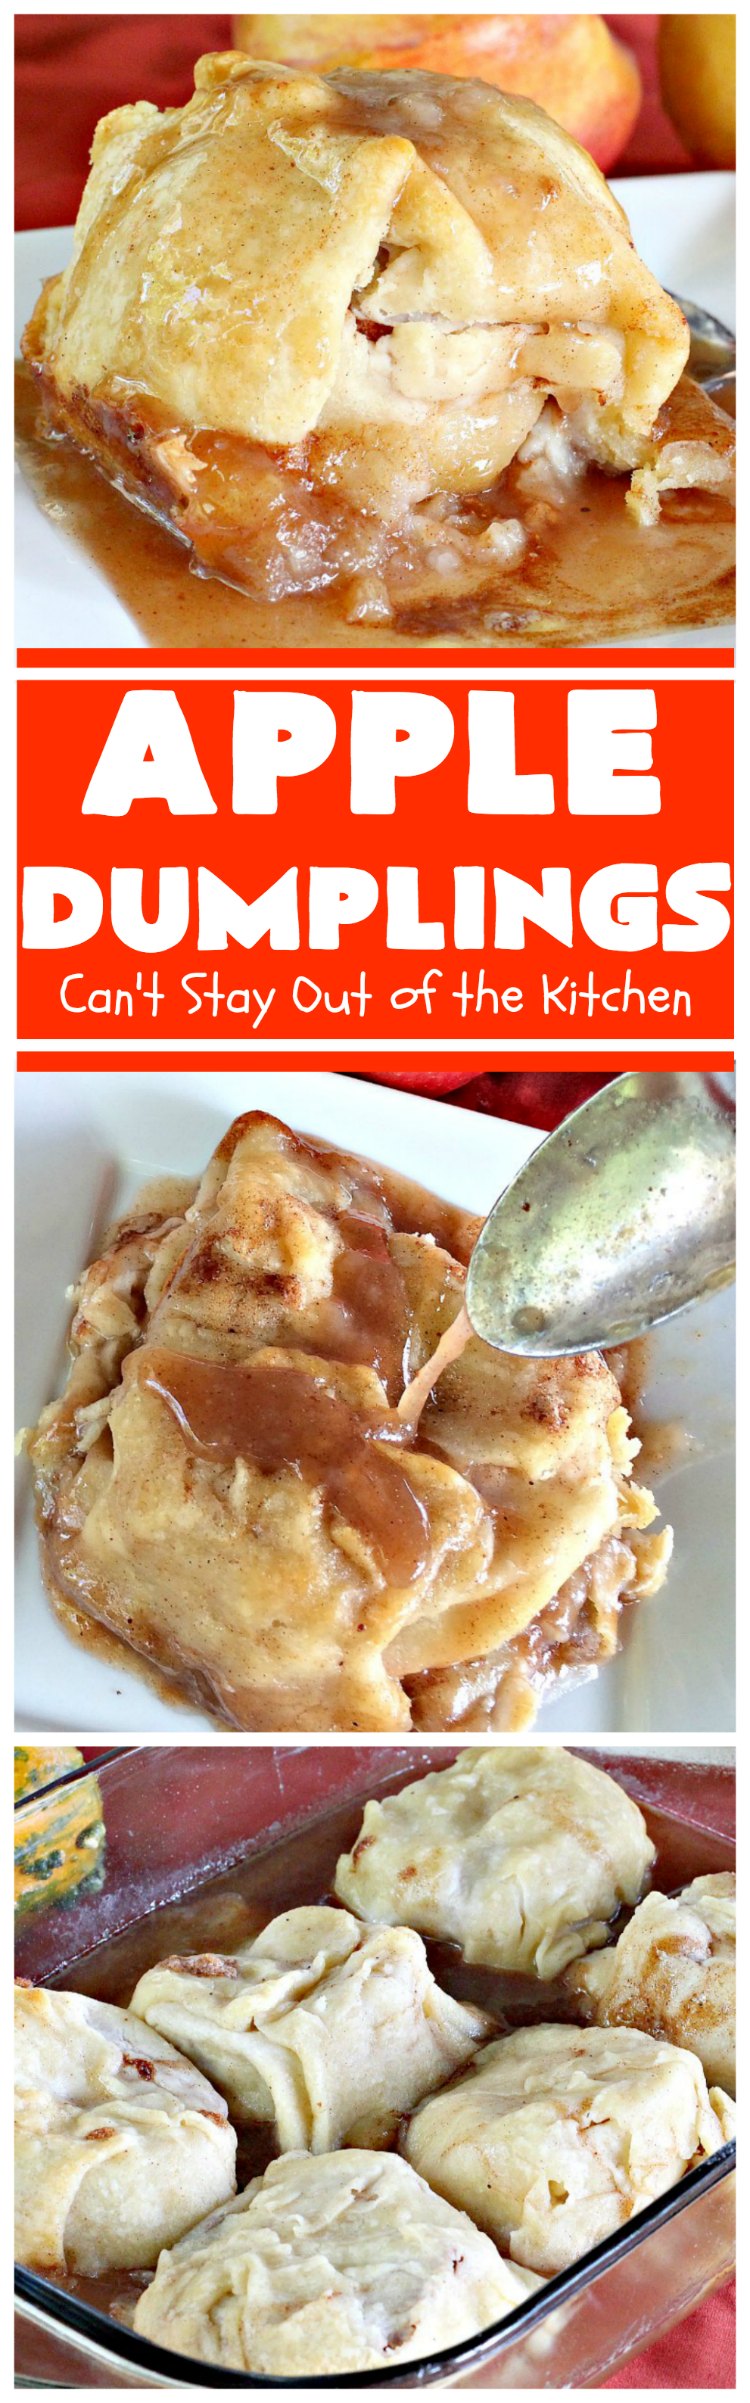 Apple Dumplings | Can't Stay Out of the Kitchen